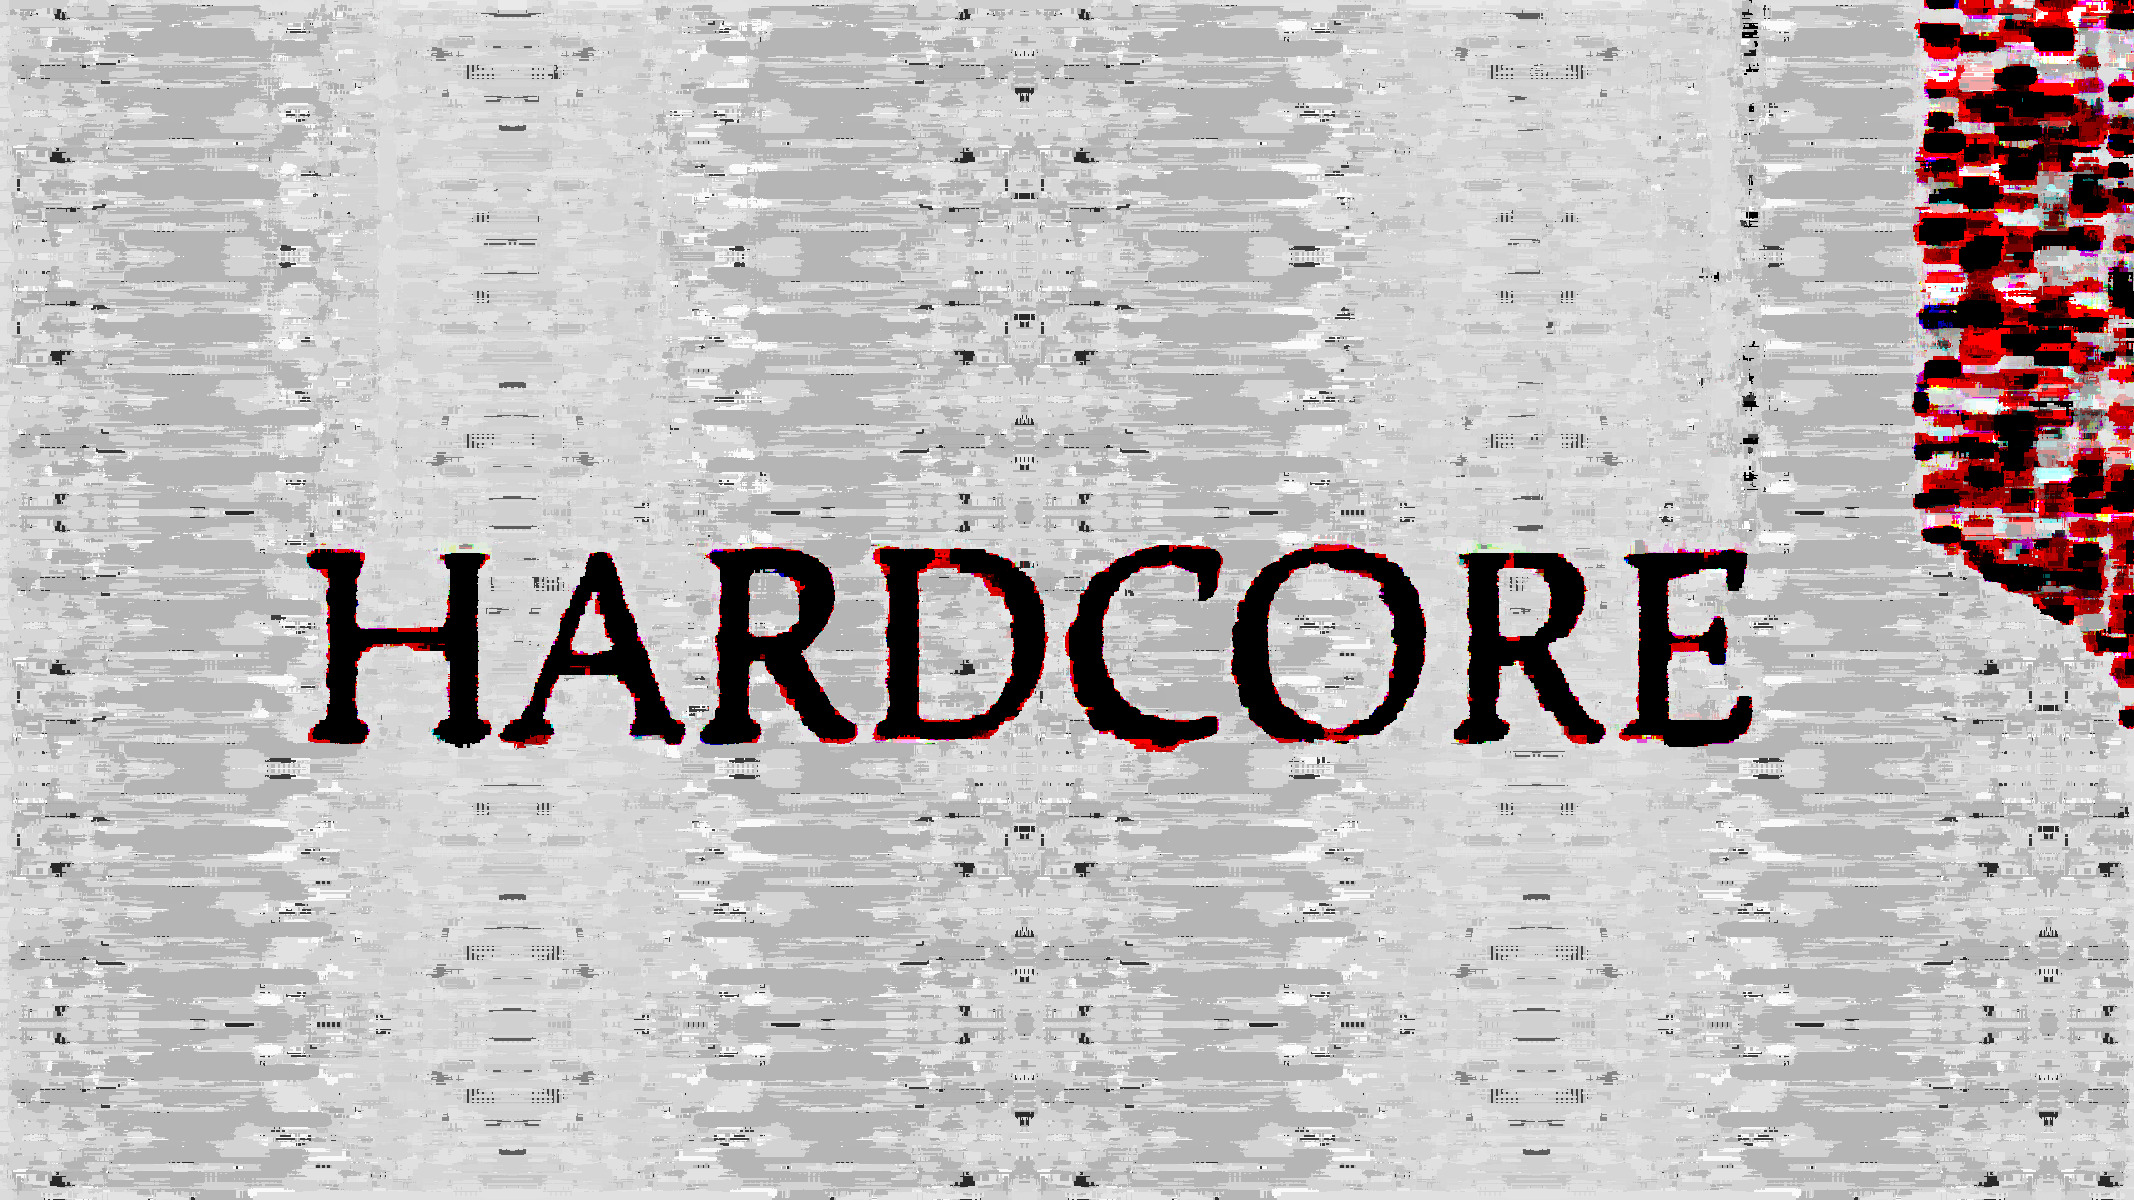 hardcore, Hardstyle, Red, Glitch art, Typography Wallpaper